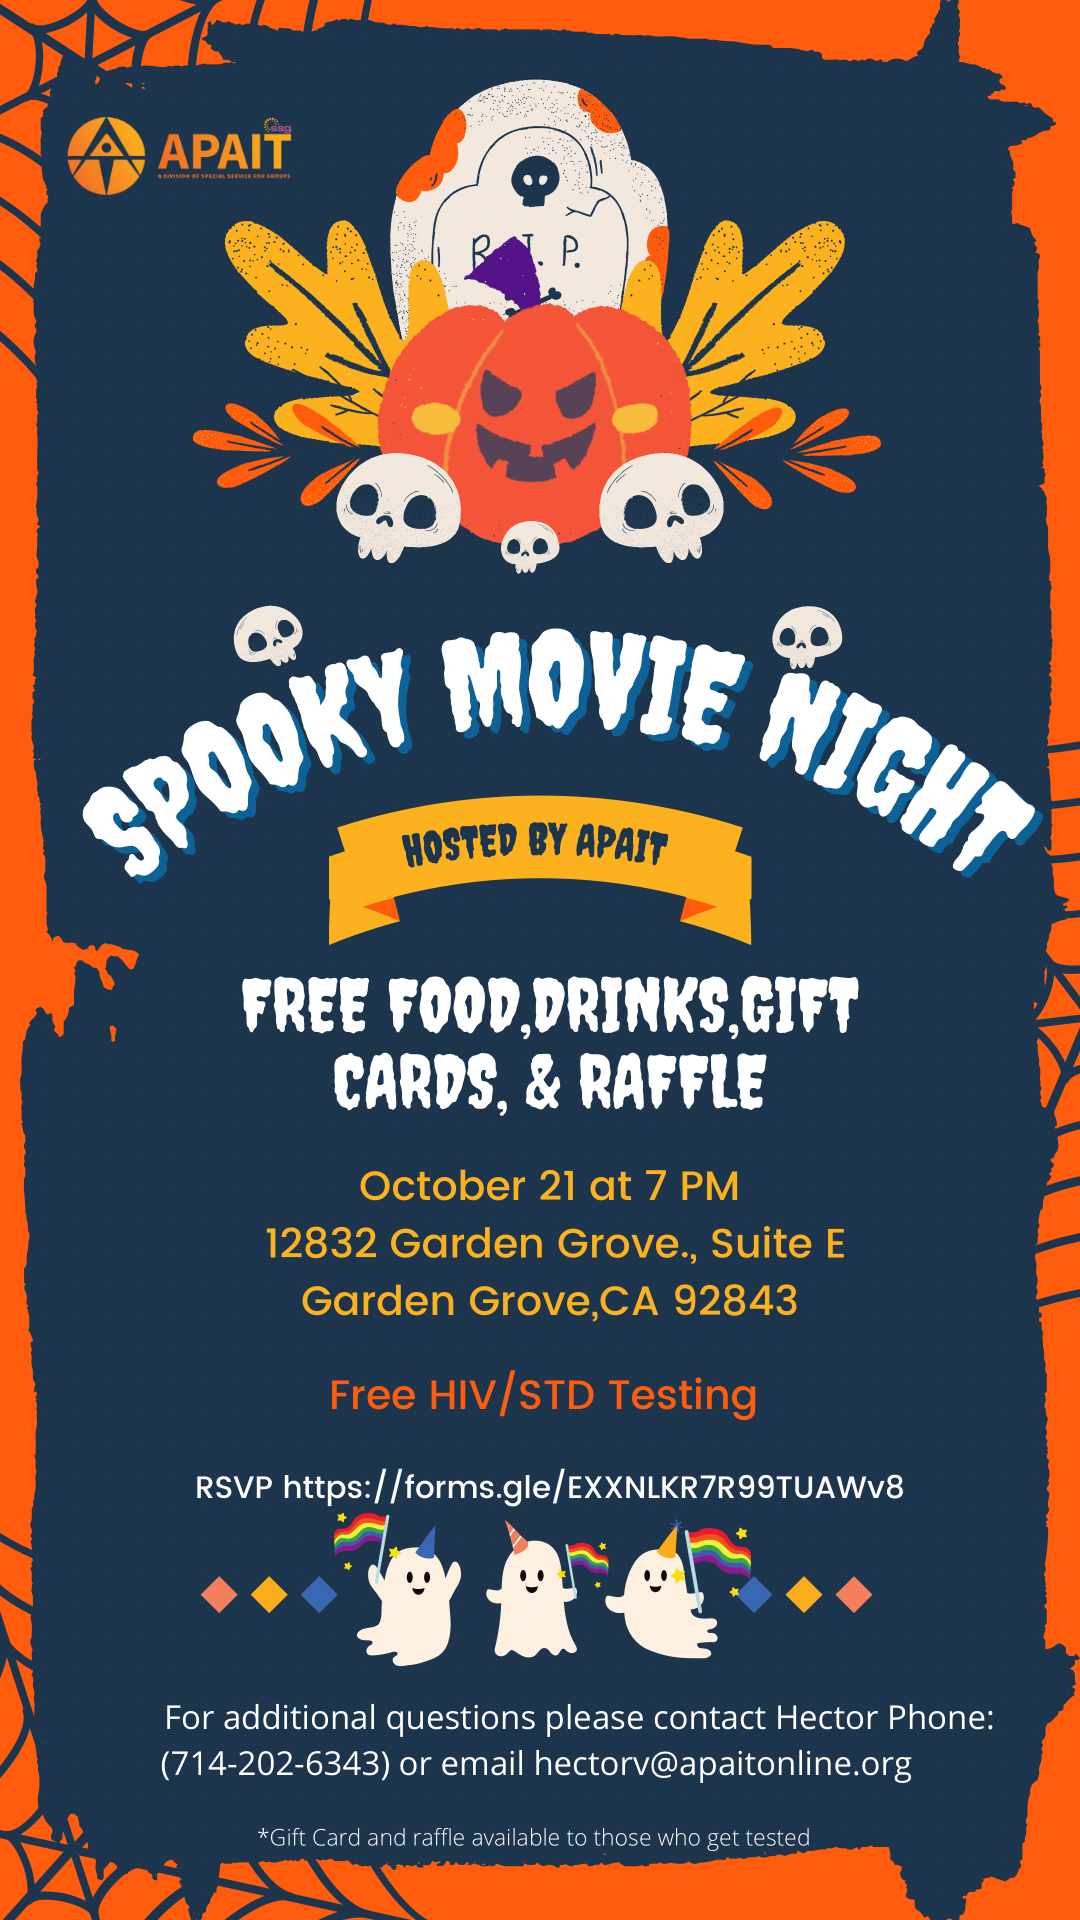 Spooky Movie Night hosted by APAIT